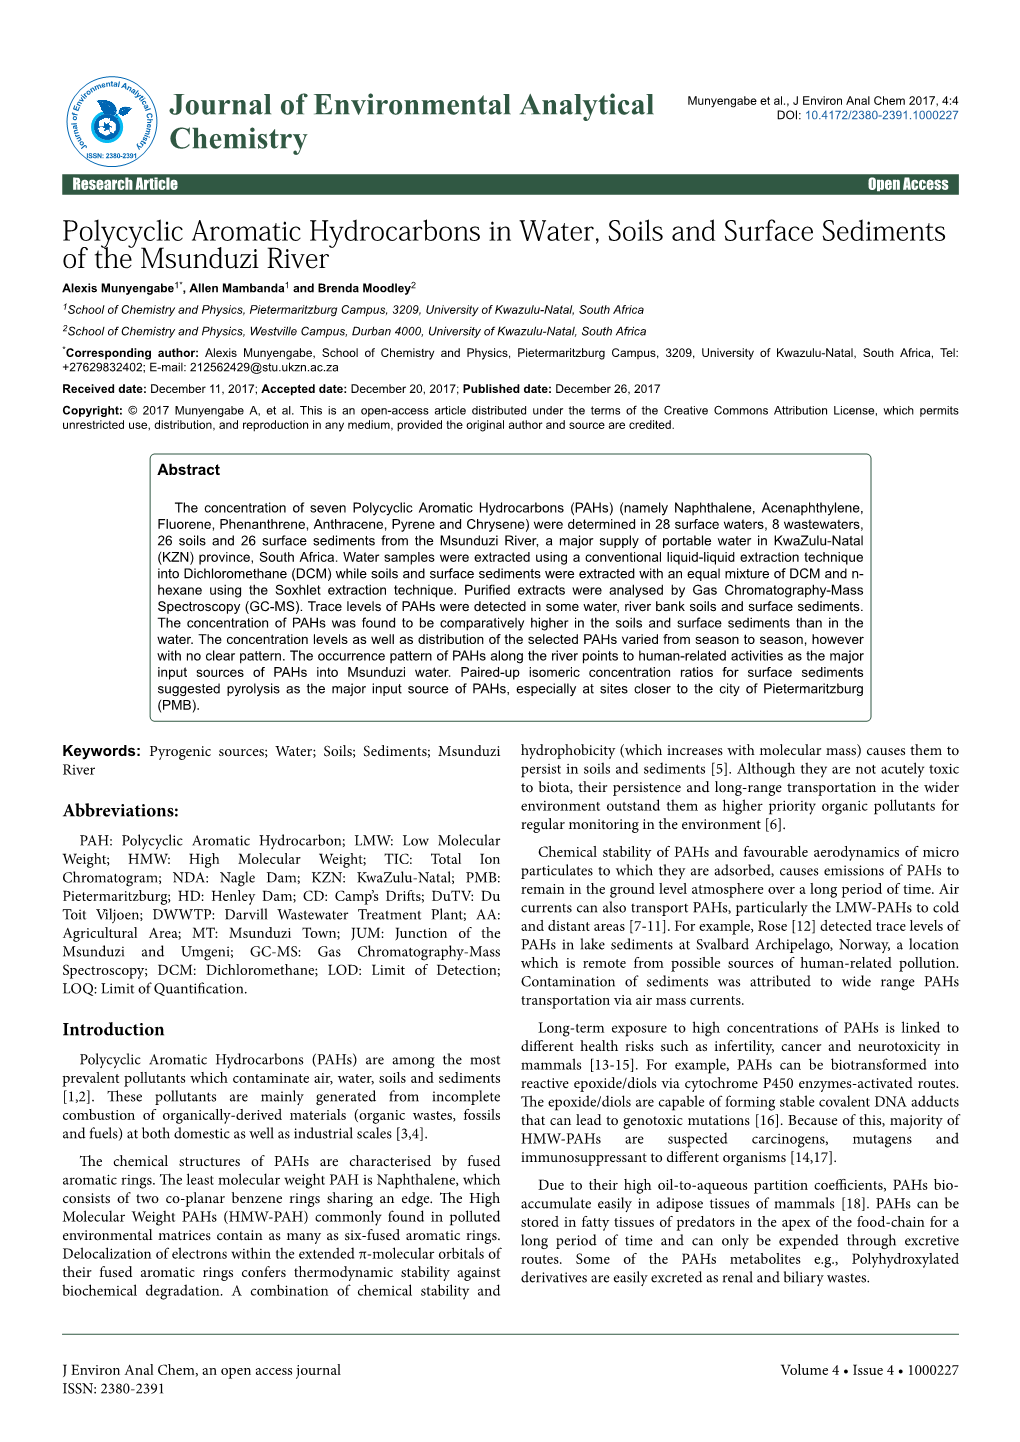 Polycyclic Aromatic Hydrocarbons in Water, Soils and Surface Sediments